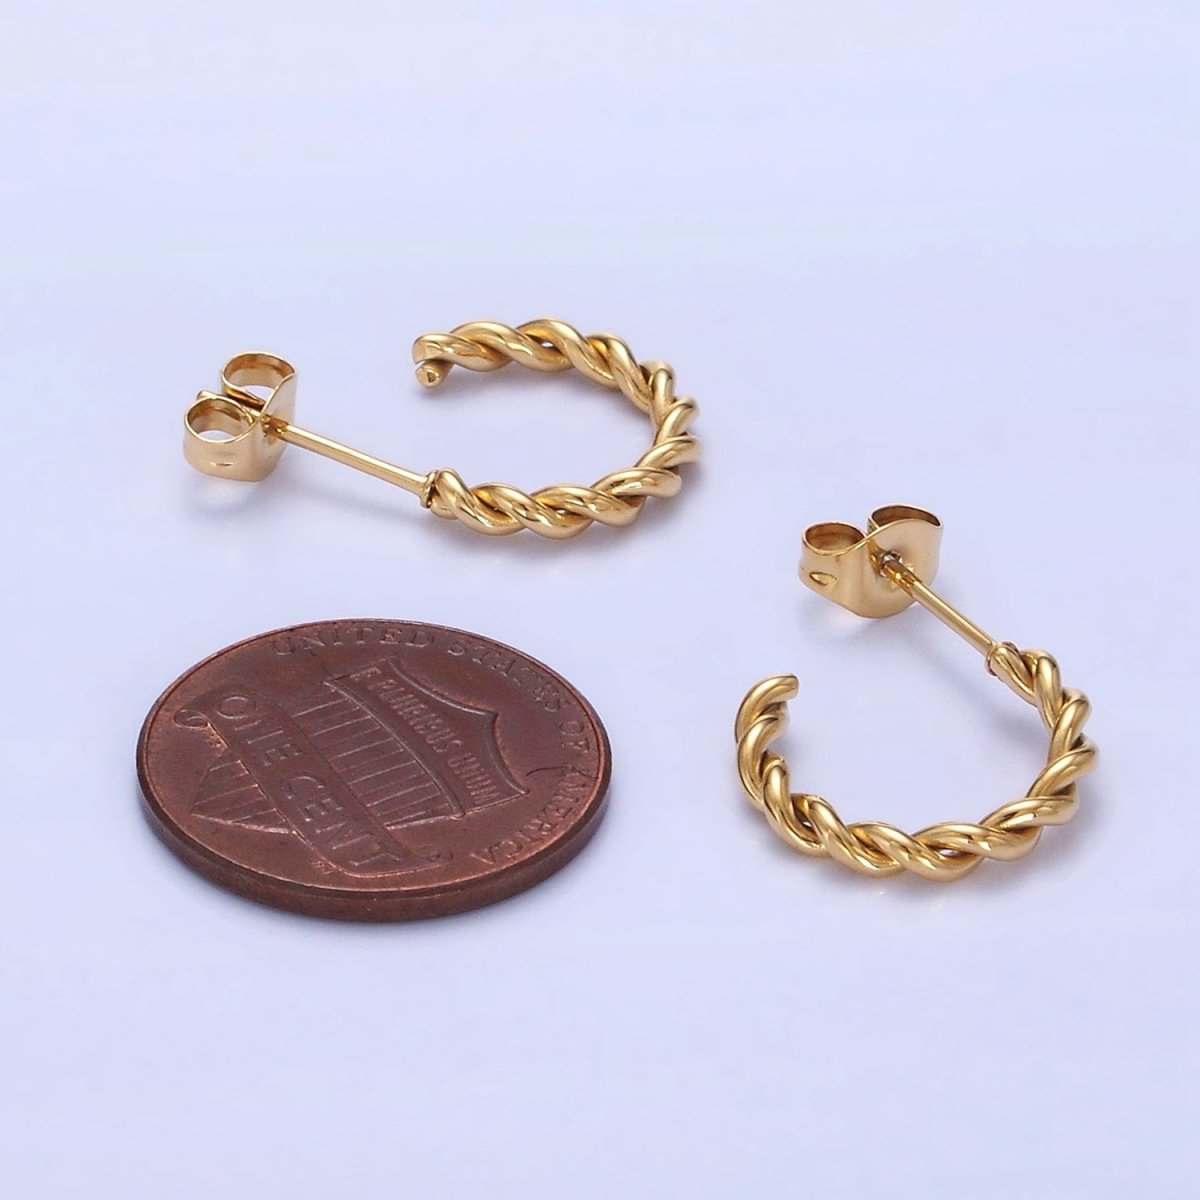 Stainless Steel 15mm Rope Croissant C-Shaped Earrings in Gold & Silver | AB1396 AB1397 - DLUXCA